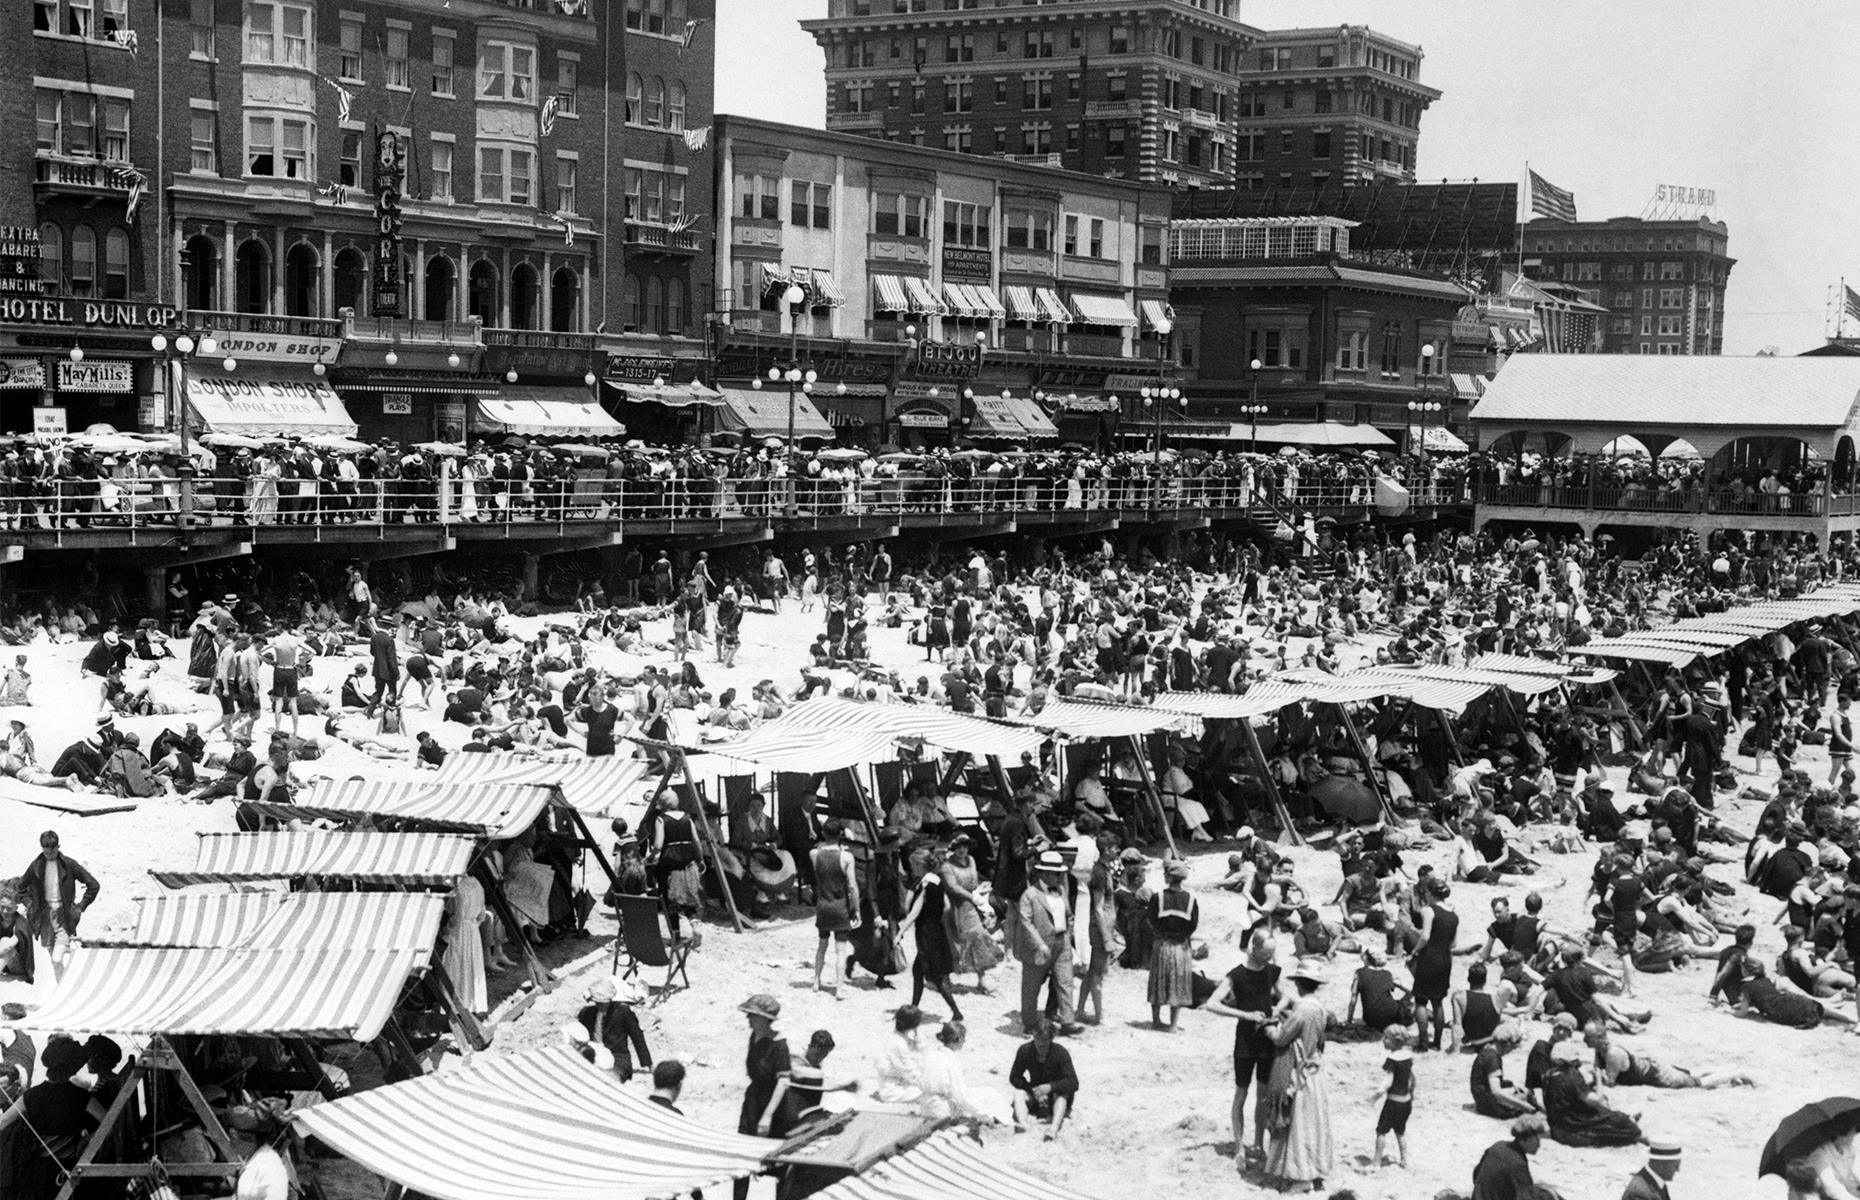 Down in New Jersey, Atlantic City was another destination whose shores were full to the brim come summer. This photo was snapped in the Roaring Twenties and sees hundreds of vacationers dot the sands of Atlantic City Beach, cooling off under umbrellas, perhaps after a dip in the ocean.